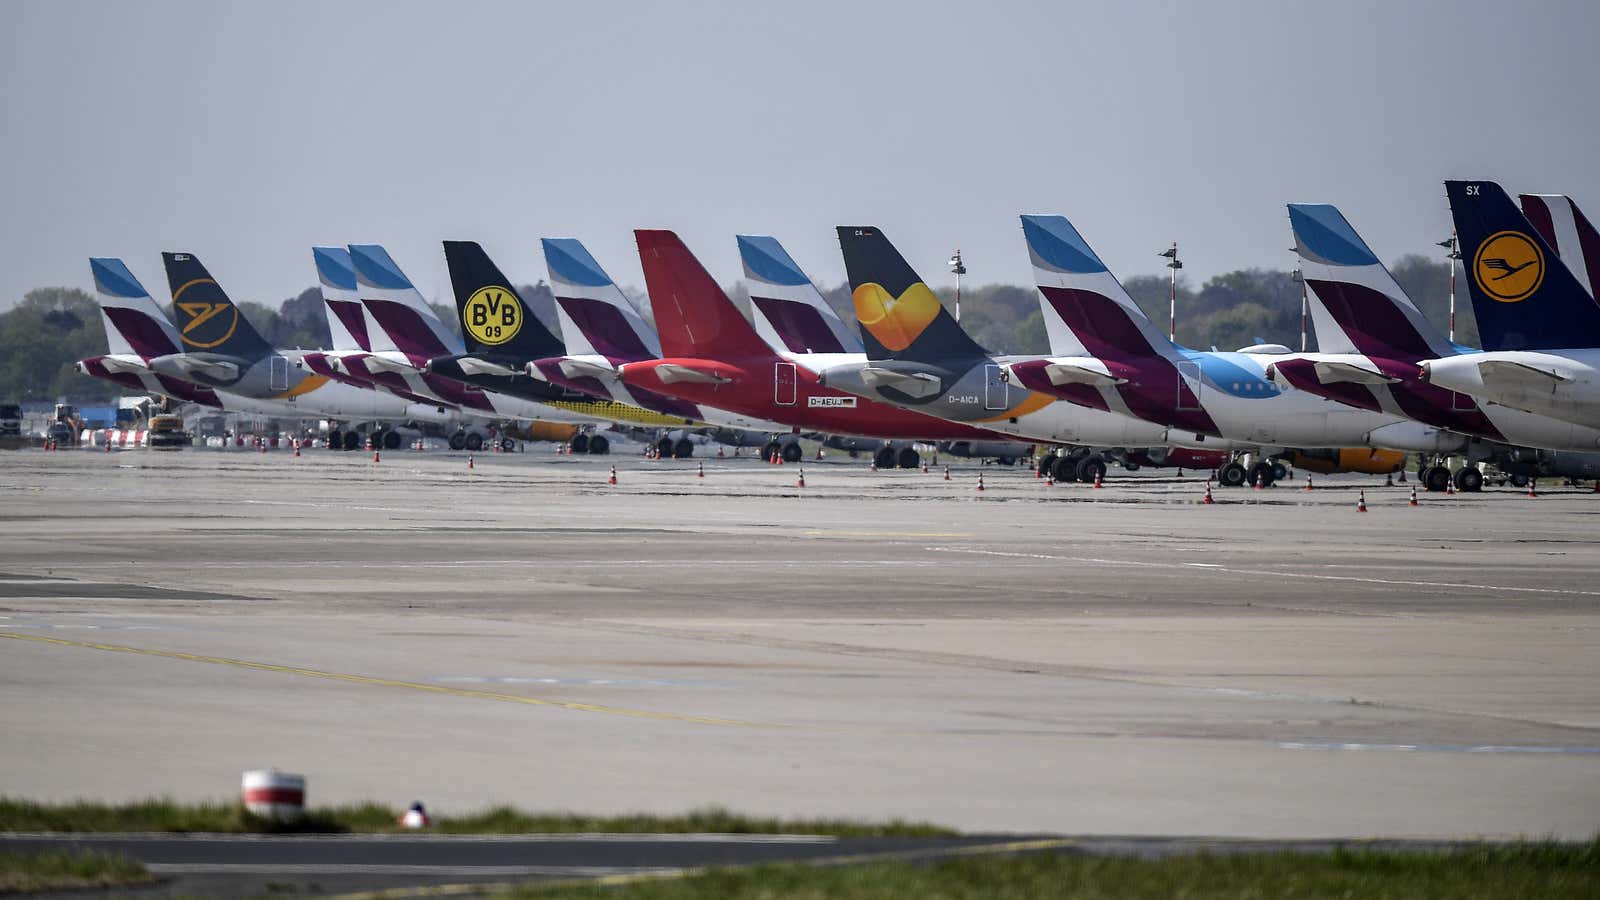 Airlines are facing a dramatic drop in air traffic—and emissions—because of coronavirus related travel restrictions.